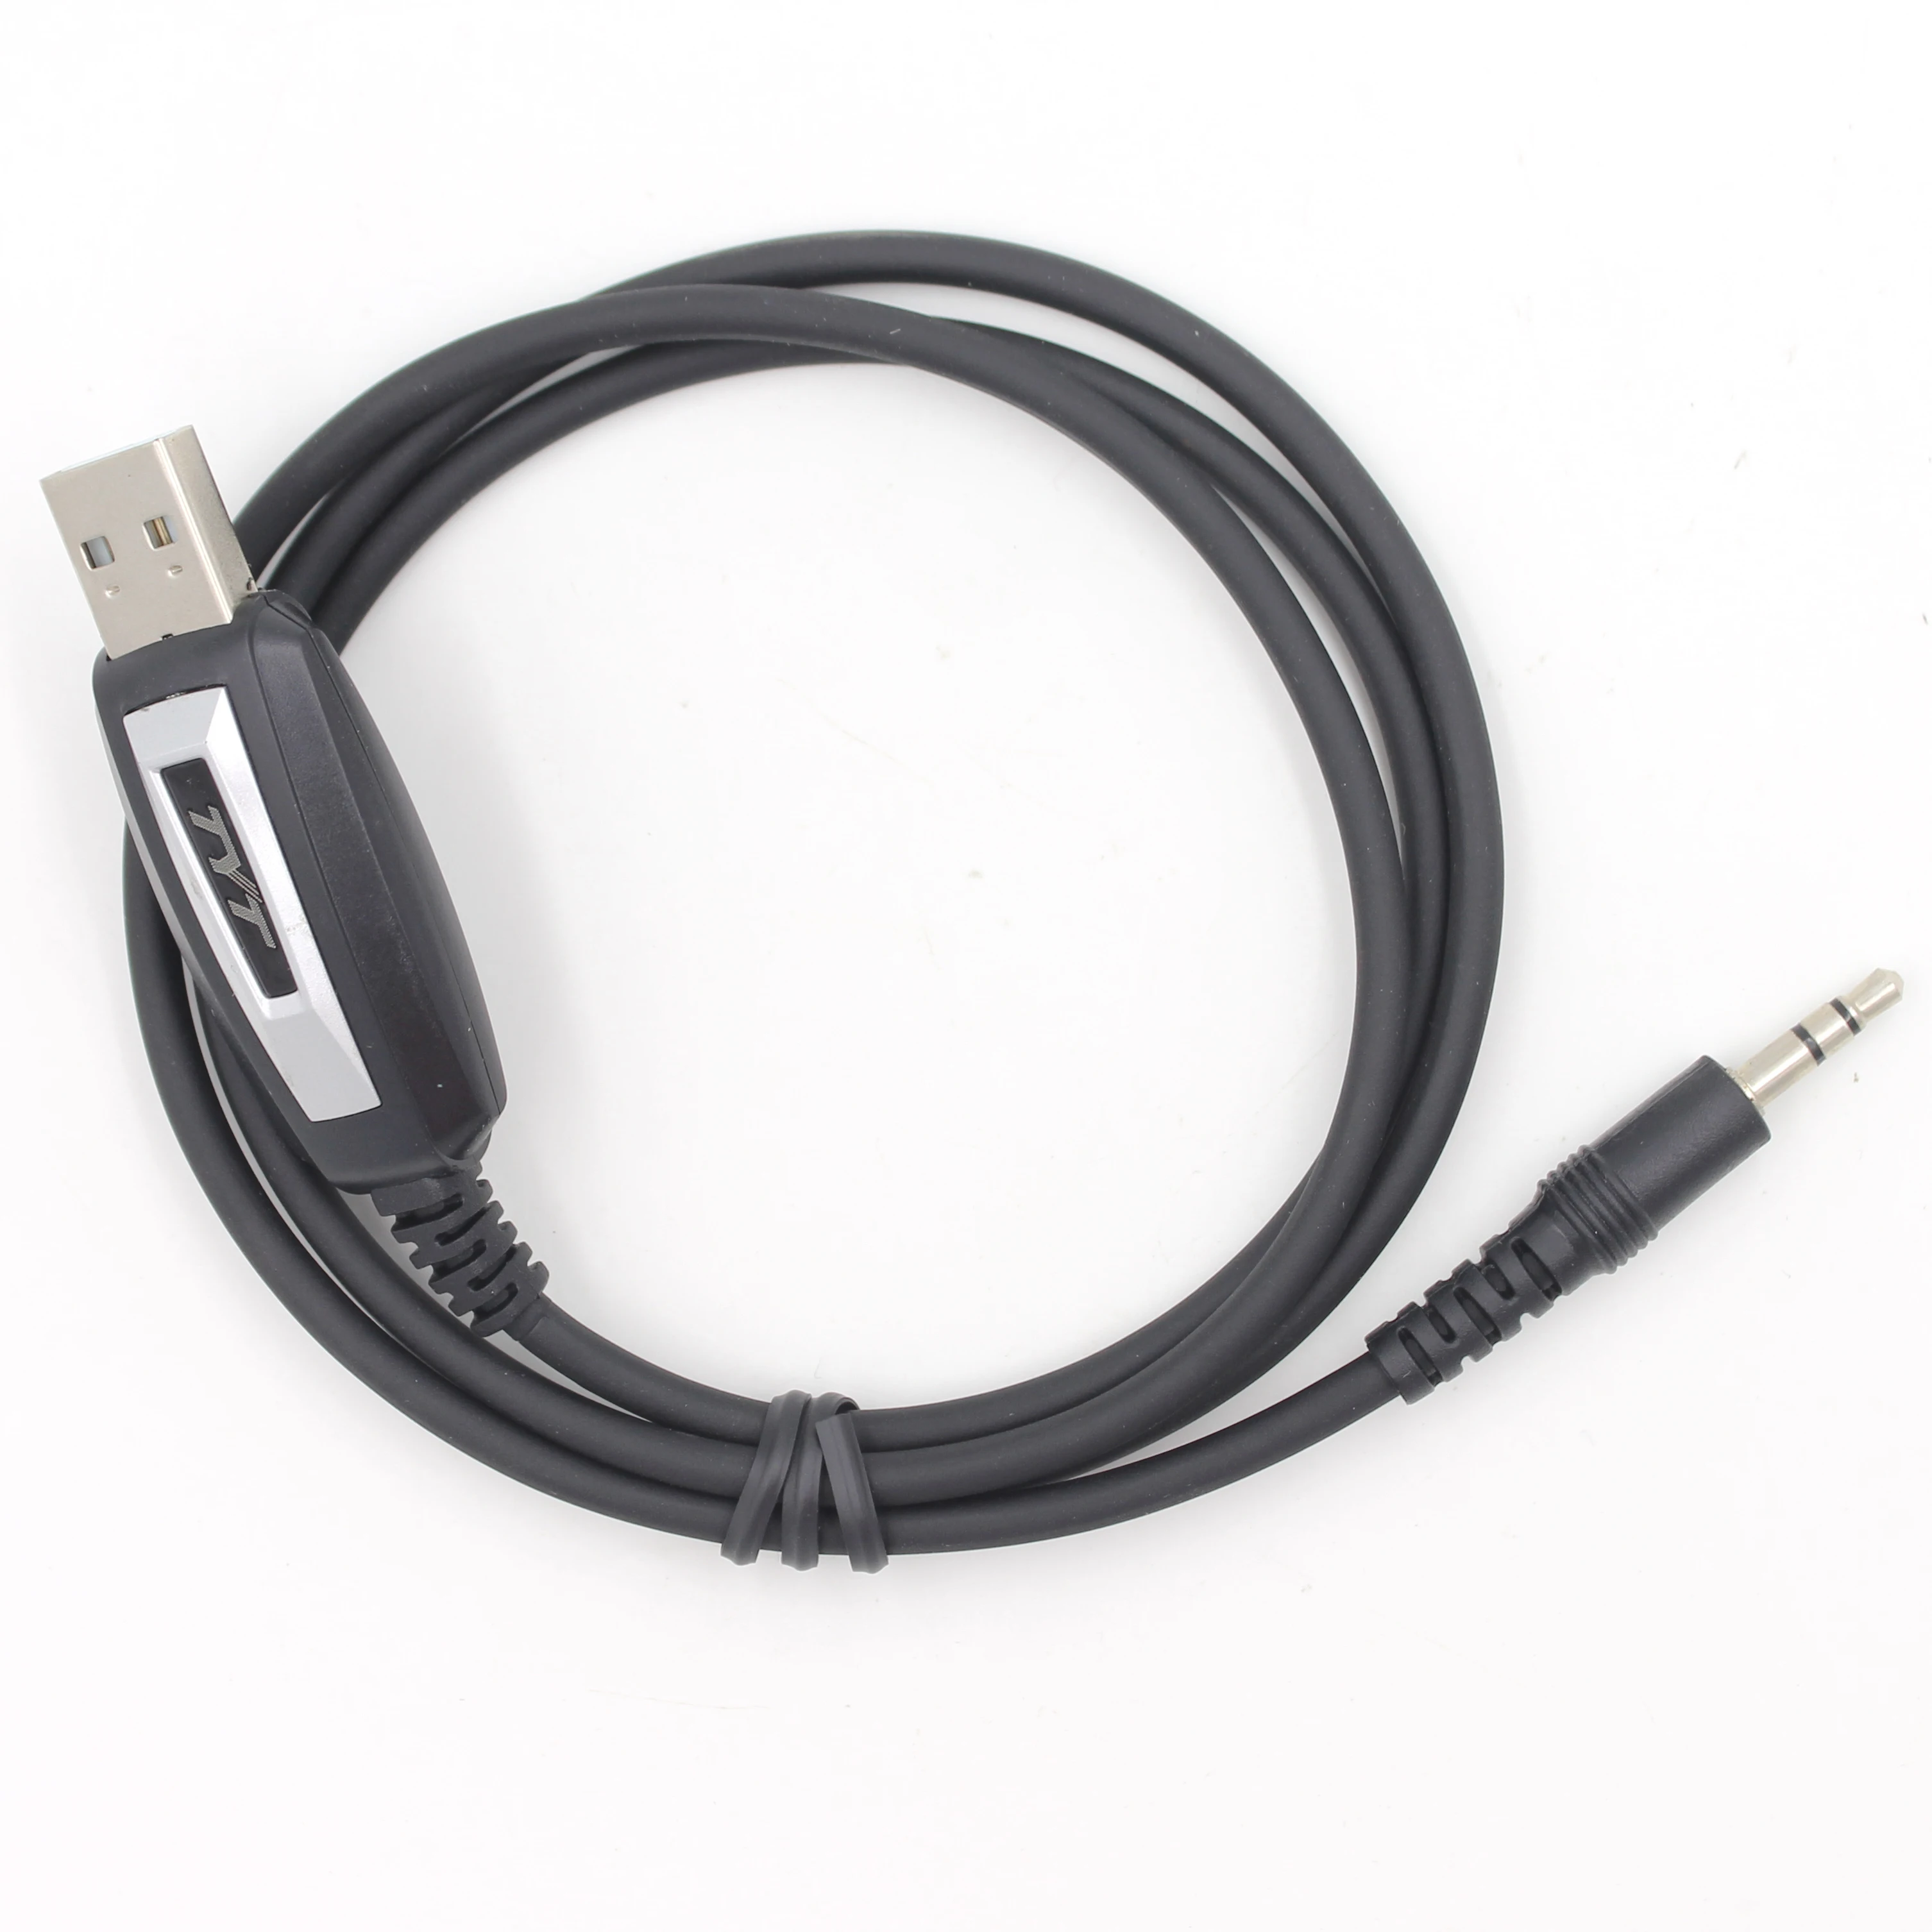 100% Original Programming Cable  For TYT TH-9000D Mobile Radio Transceiver